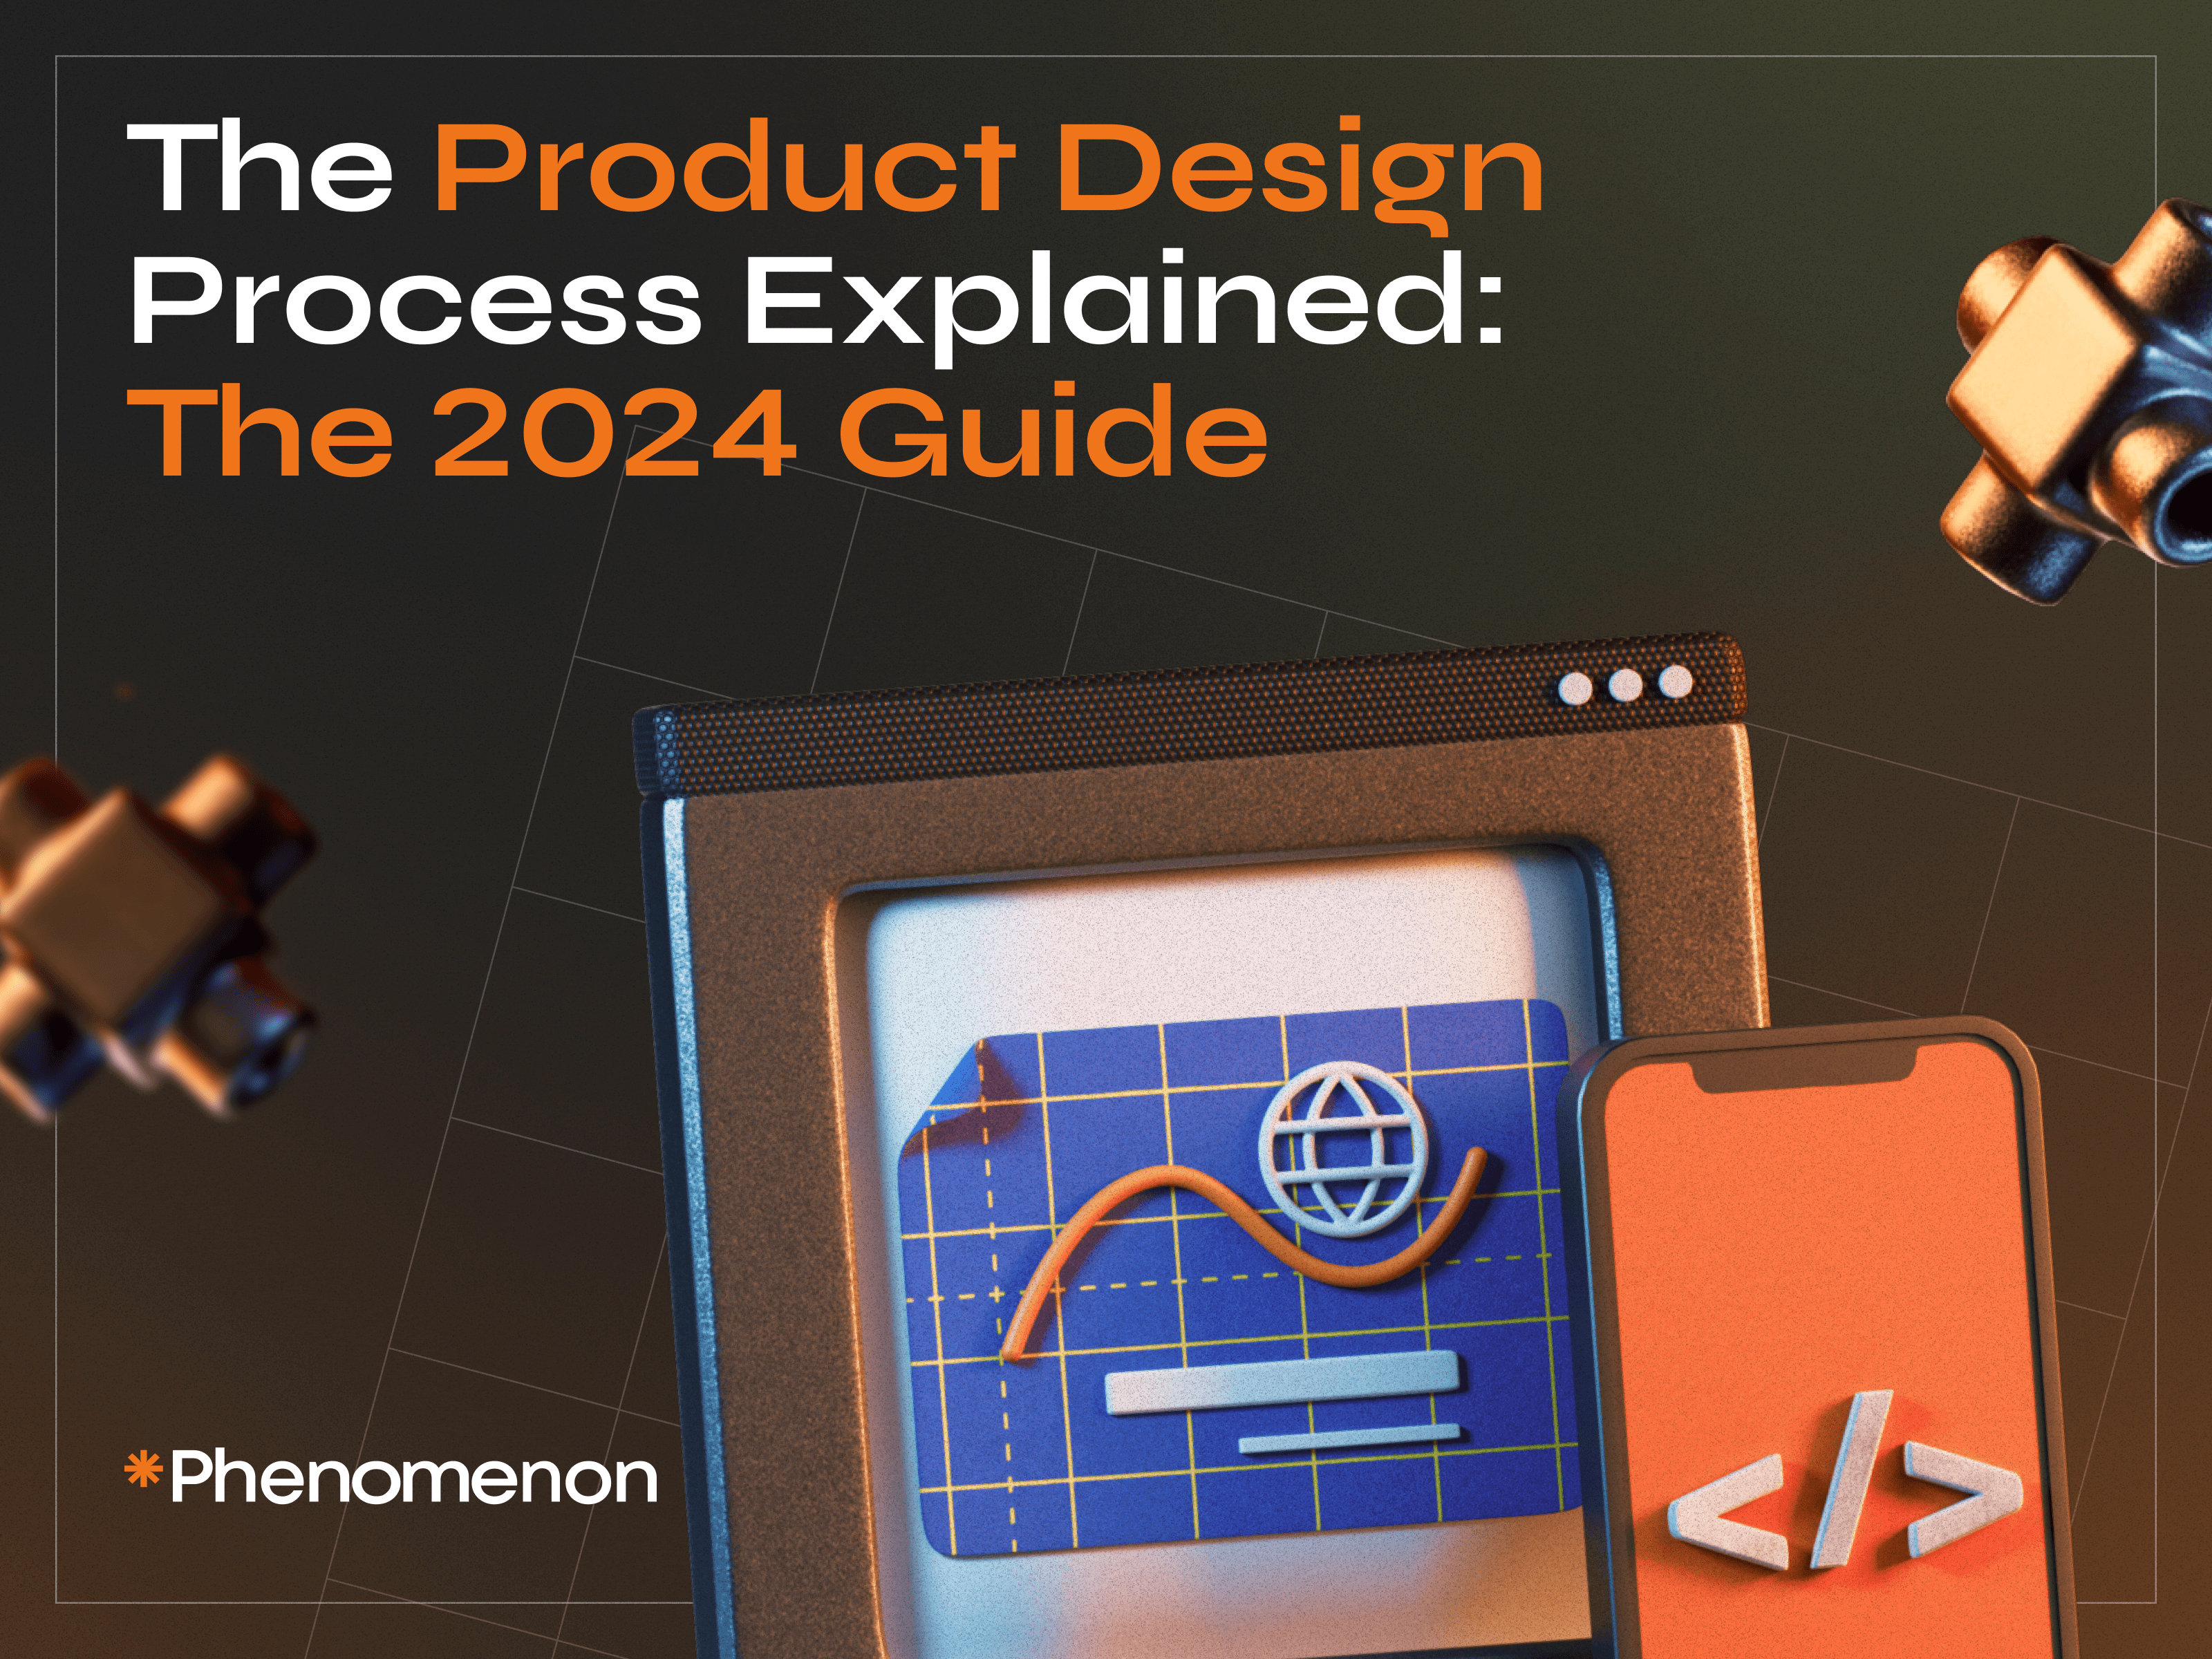 The Product Design Process Explained: The 2024 Guide - Photo 